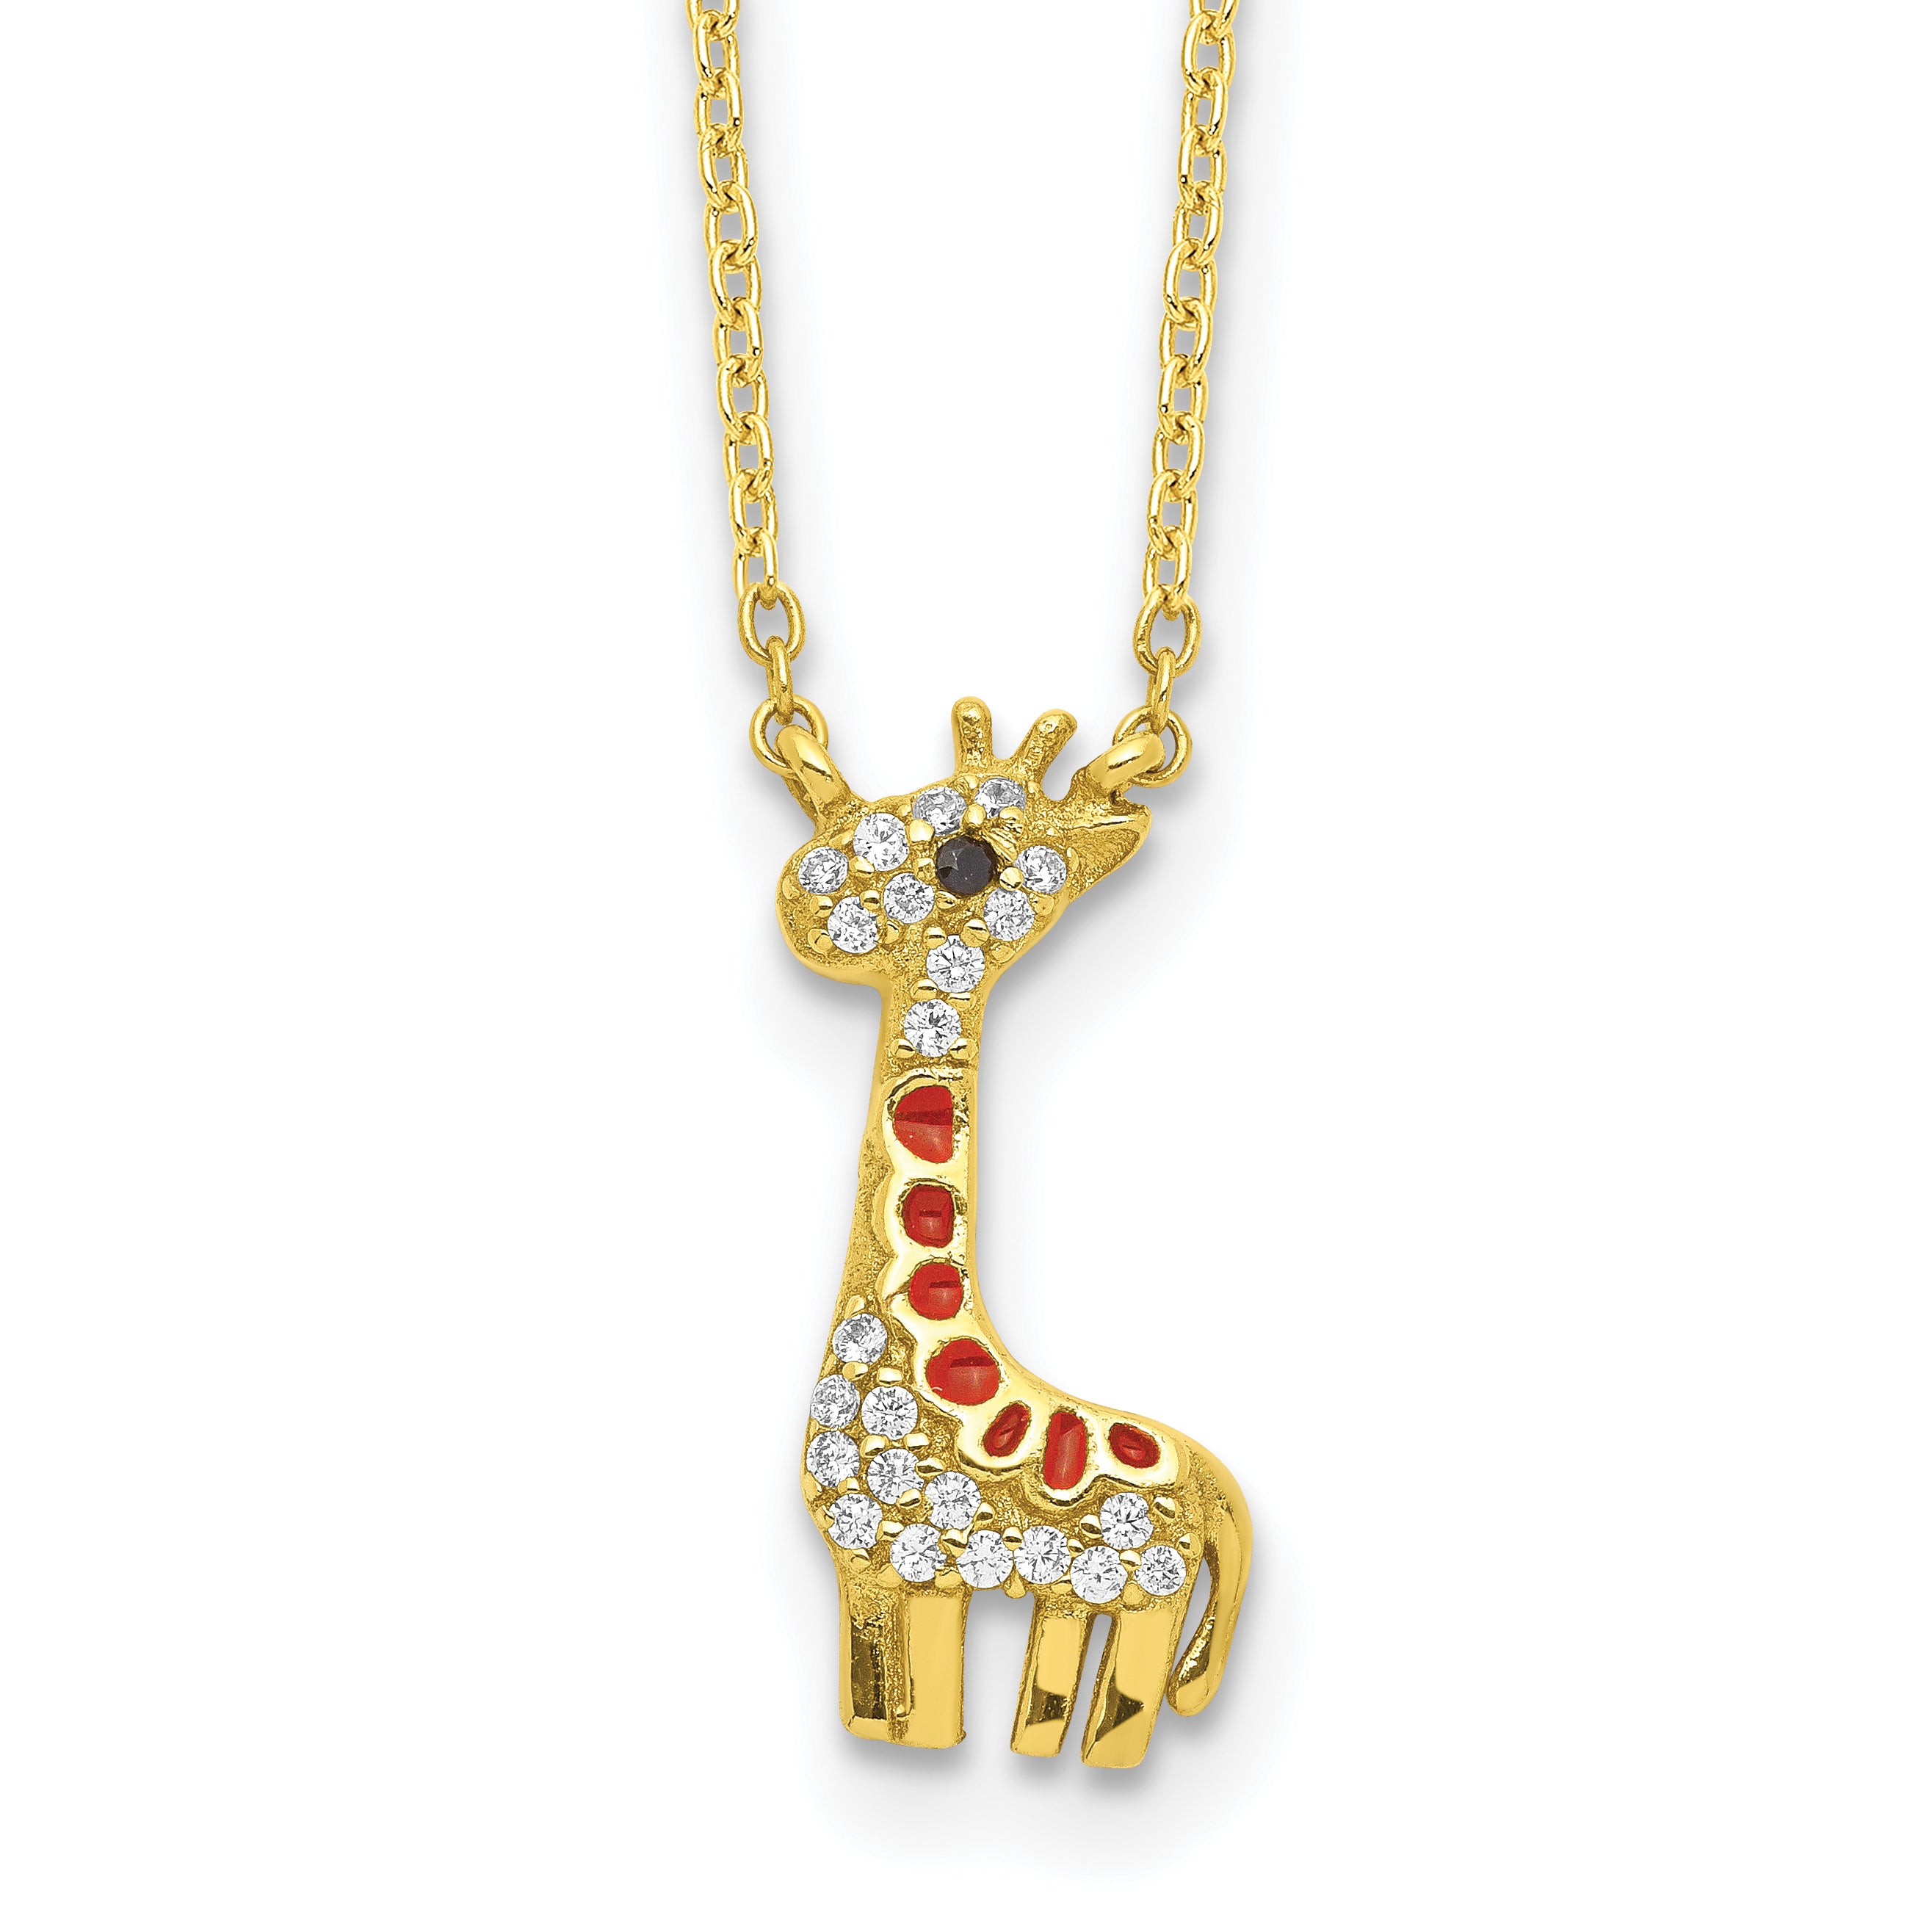 Cheryl M Sterling Silver Gold-plated Enameled and Brilliant-cut Black and White CZ Giraffe 18.25 Inch Necklace